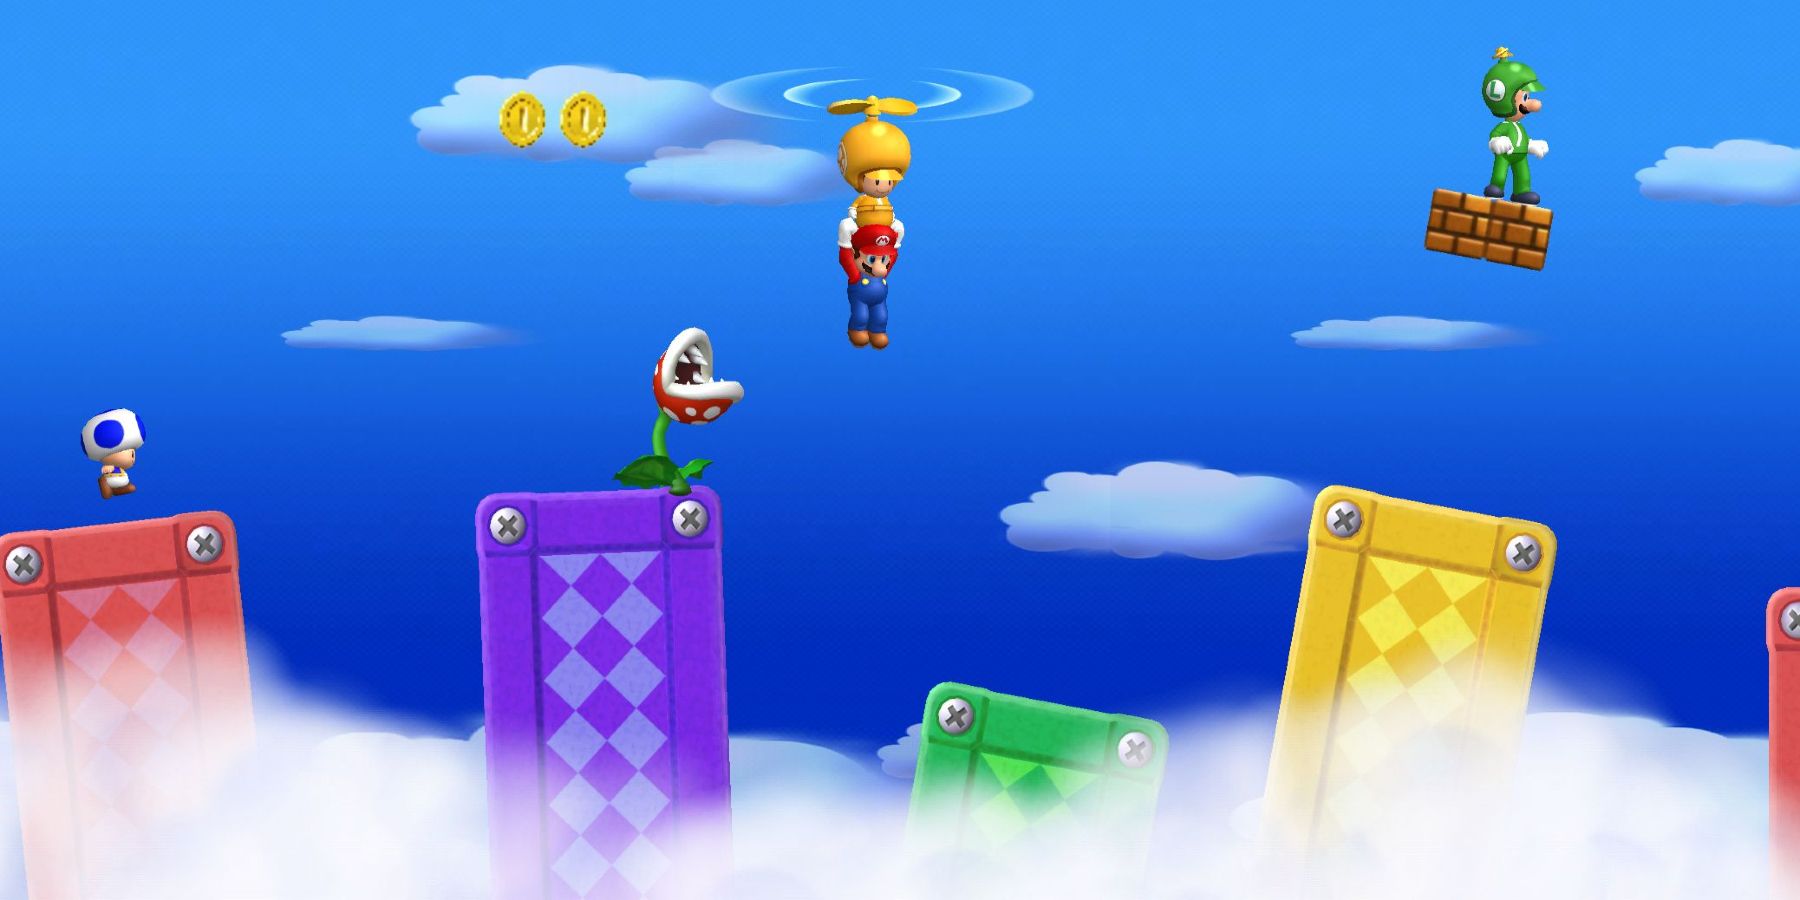 Mario, Luigi, and the Toads traversing the clouds in New Super Mario Bros Wii